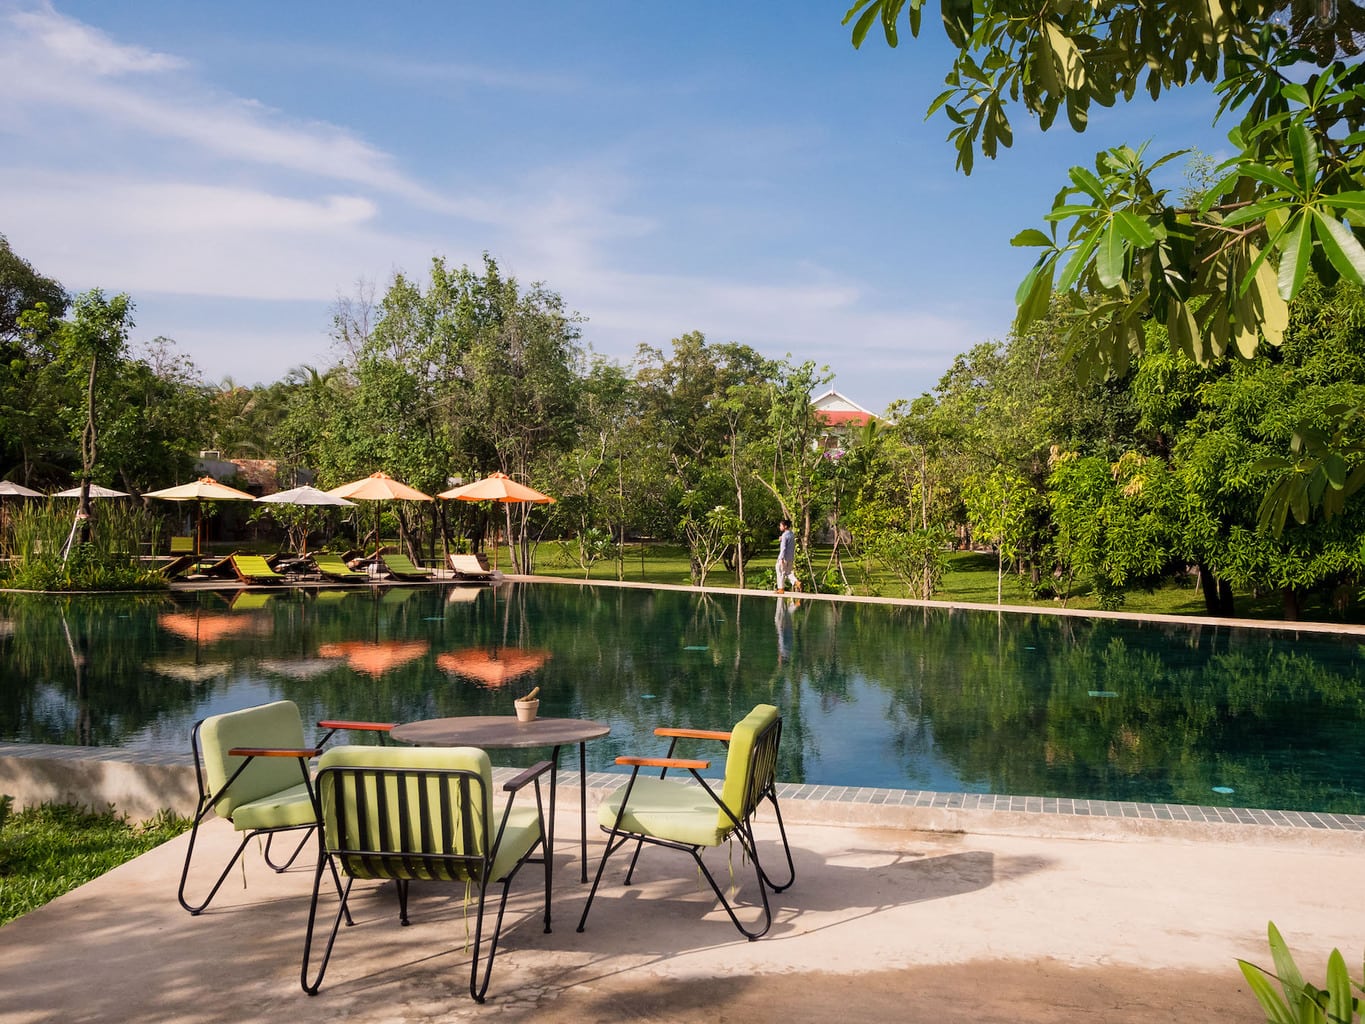 Review of Templation Siem Reap the closest hotel to Angkor Wat